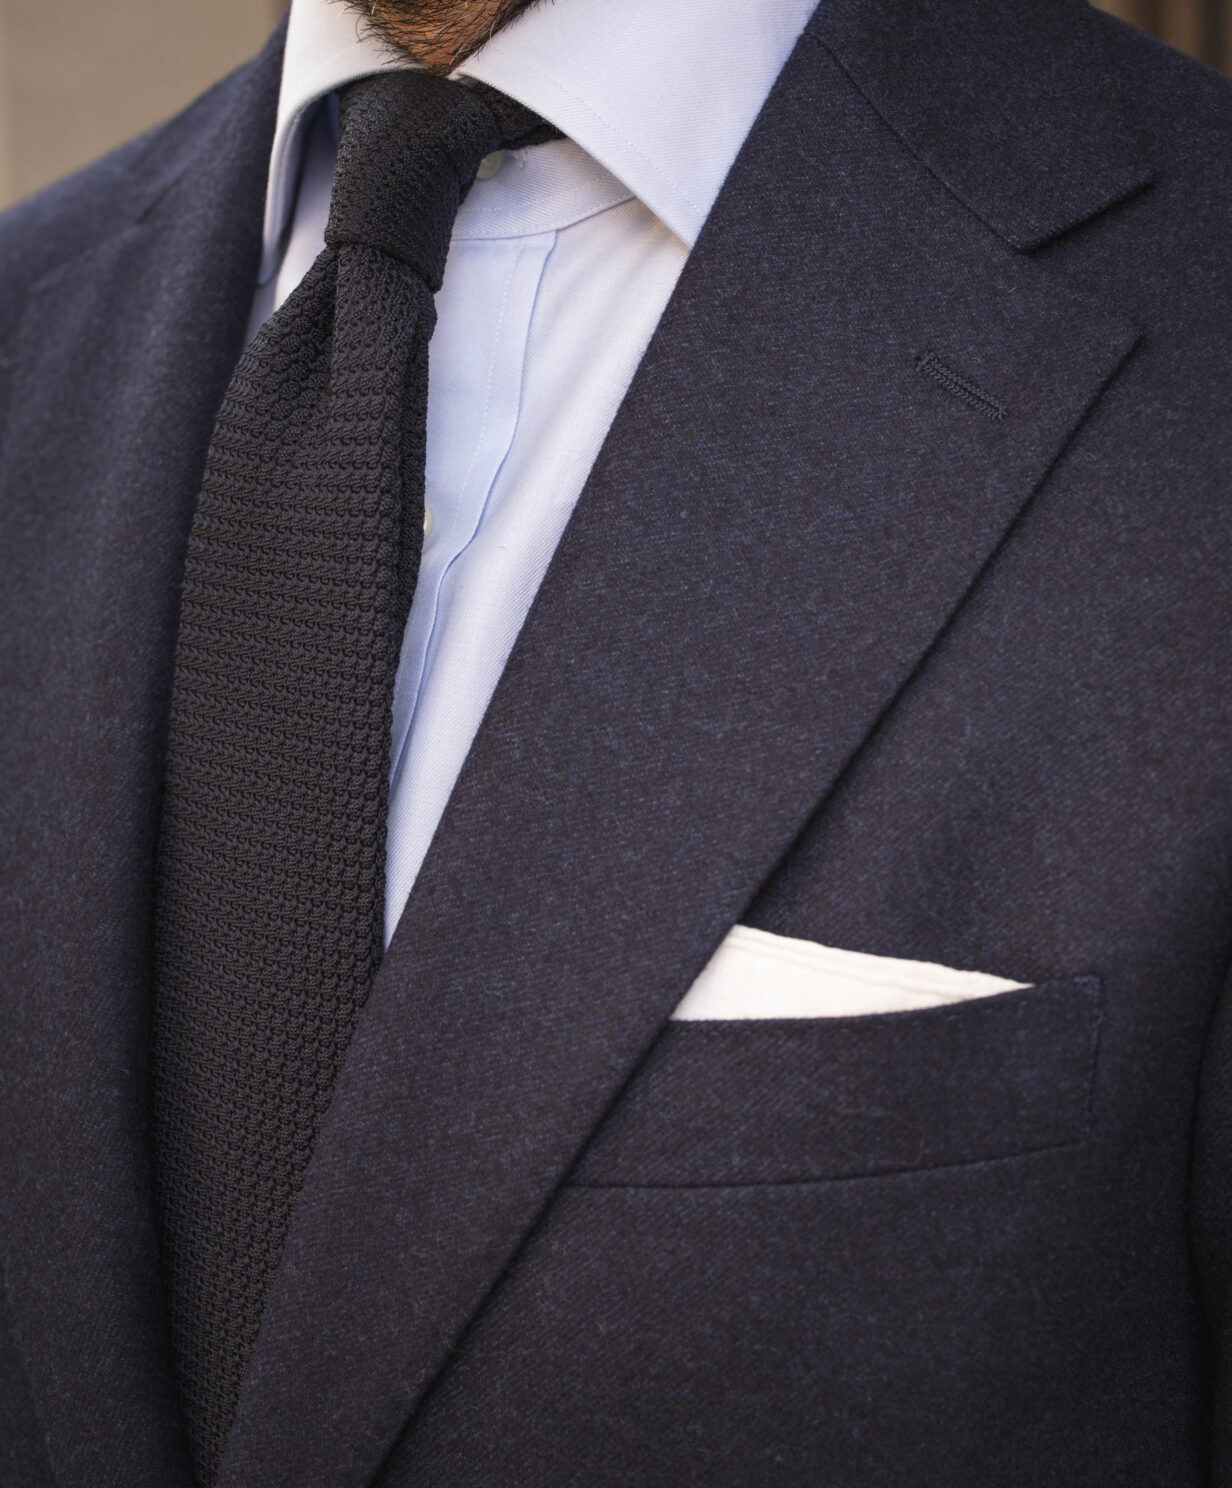 Navy Blue Flannel Suit with Blue Shirt and Tie | He Spoke Style